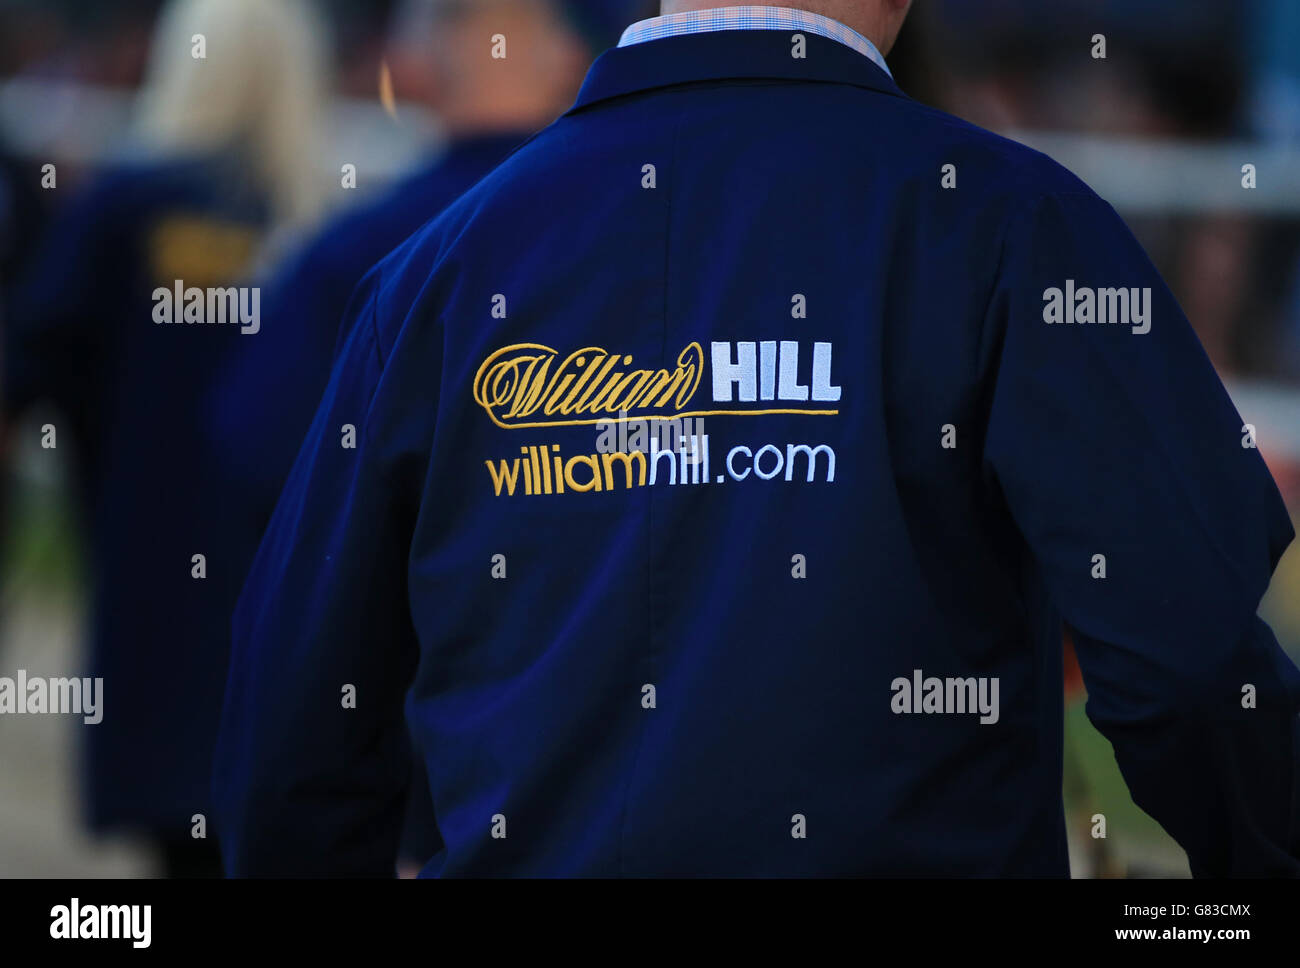 Greyhound Racing - William Hill Derby - Finals - Wimbledon Stadium. Details of handlers coat with WilliamHill.com on the back of the jacket Stock Photo